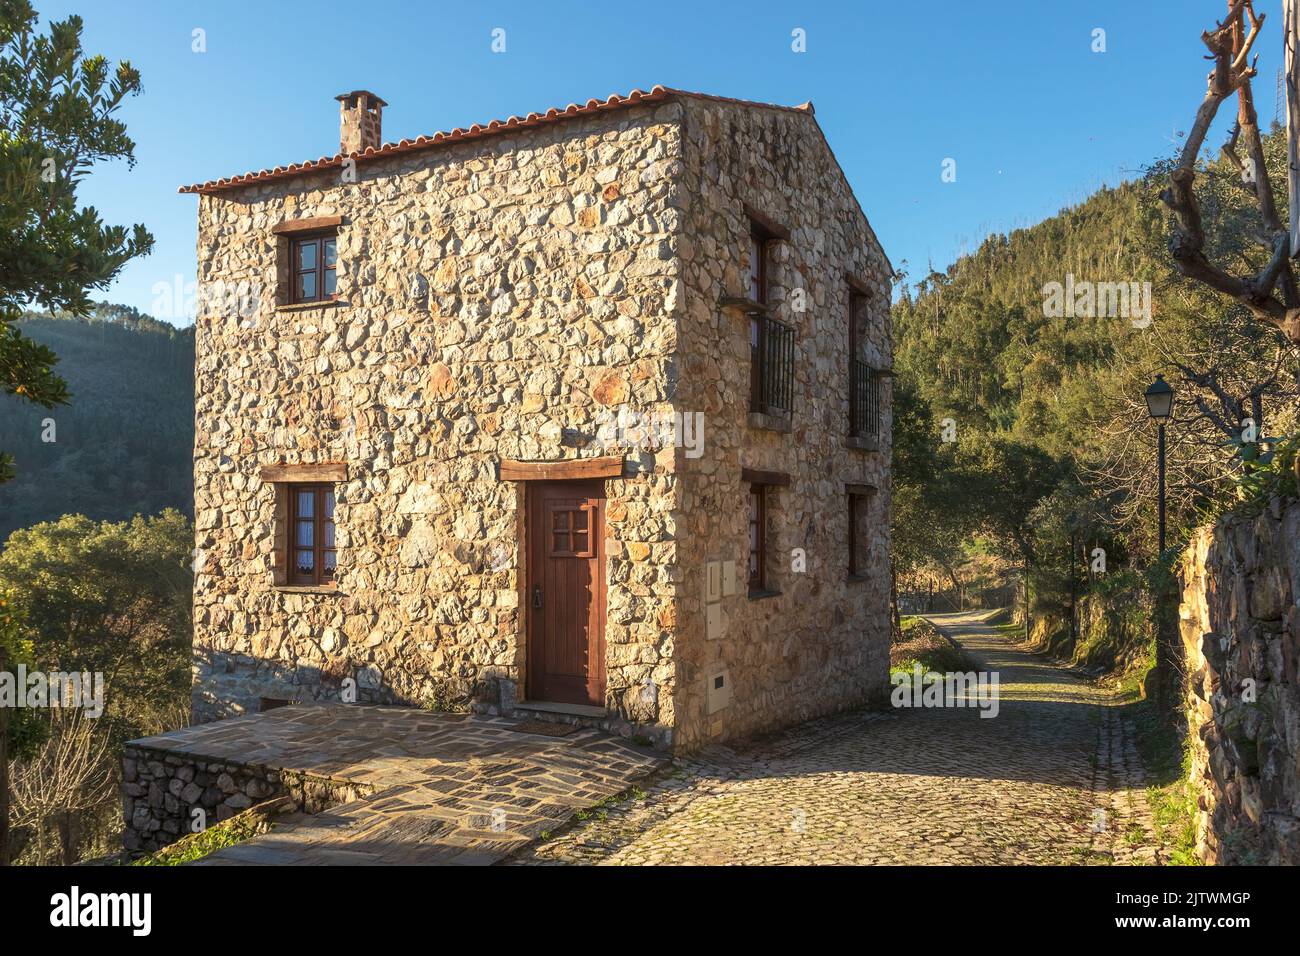 Street and stone house in the village of Casal de São Simão, Portugal, lit by the sun in the late afternoon. Stock Photo